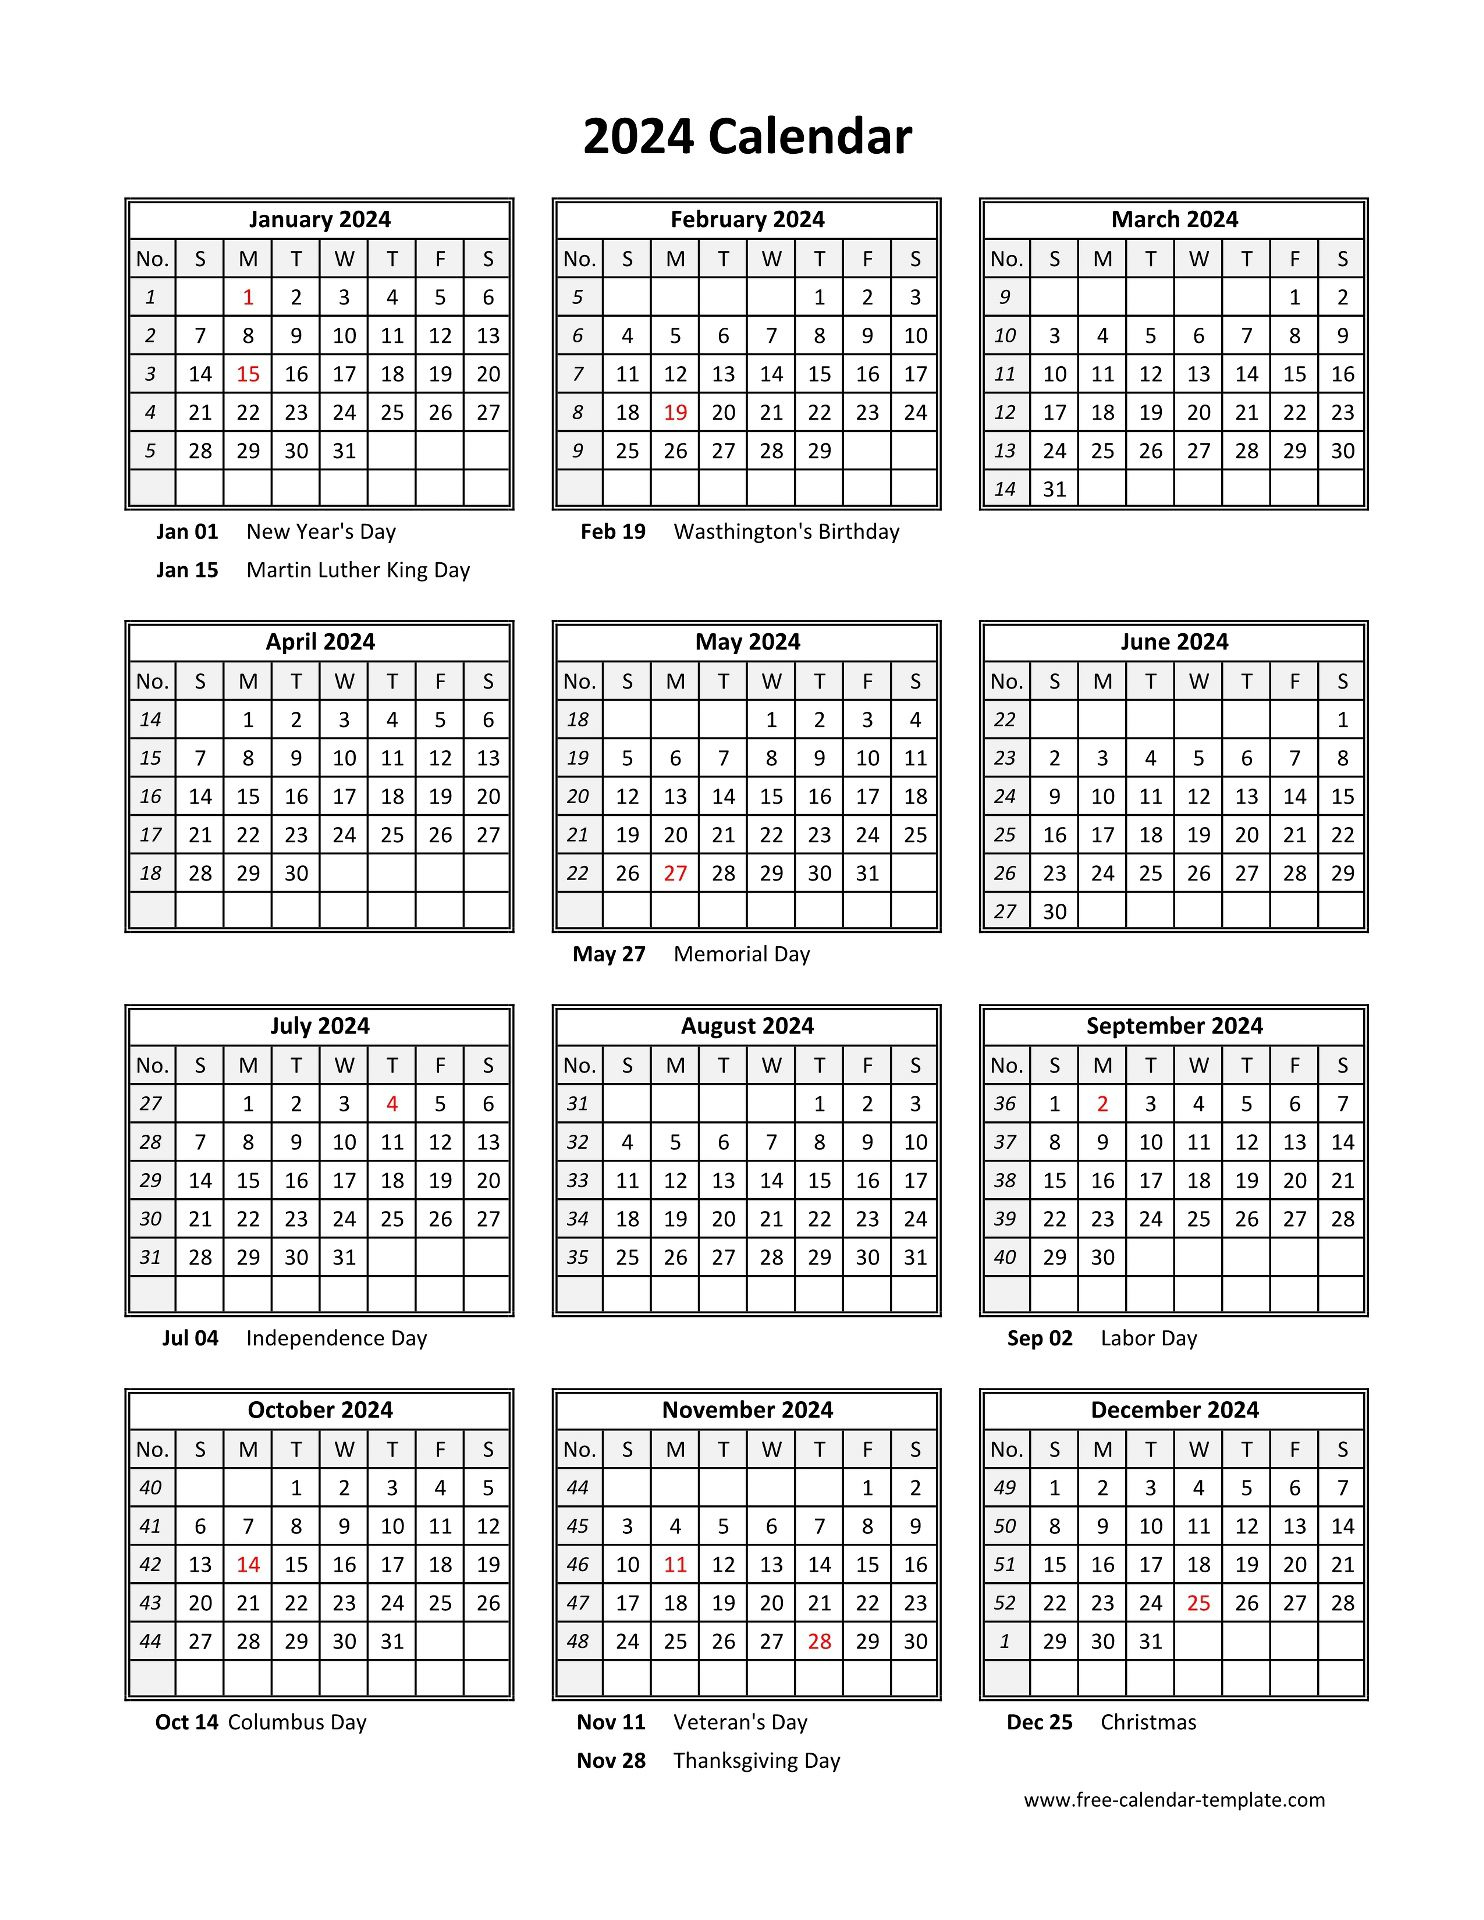 Yearly Printable Calendar 2024 With Holidays | Free-Calendar | 2024 Year View Calendar Printable